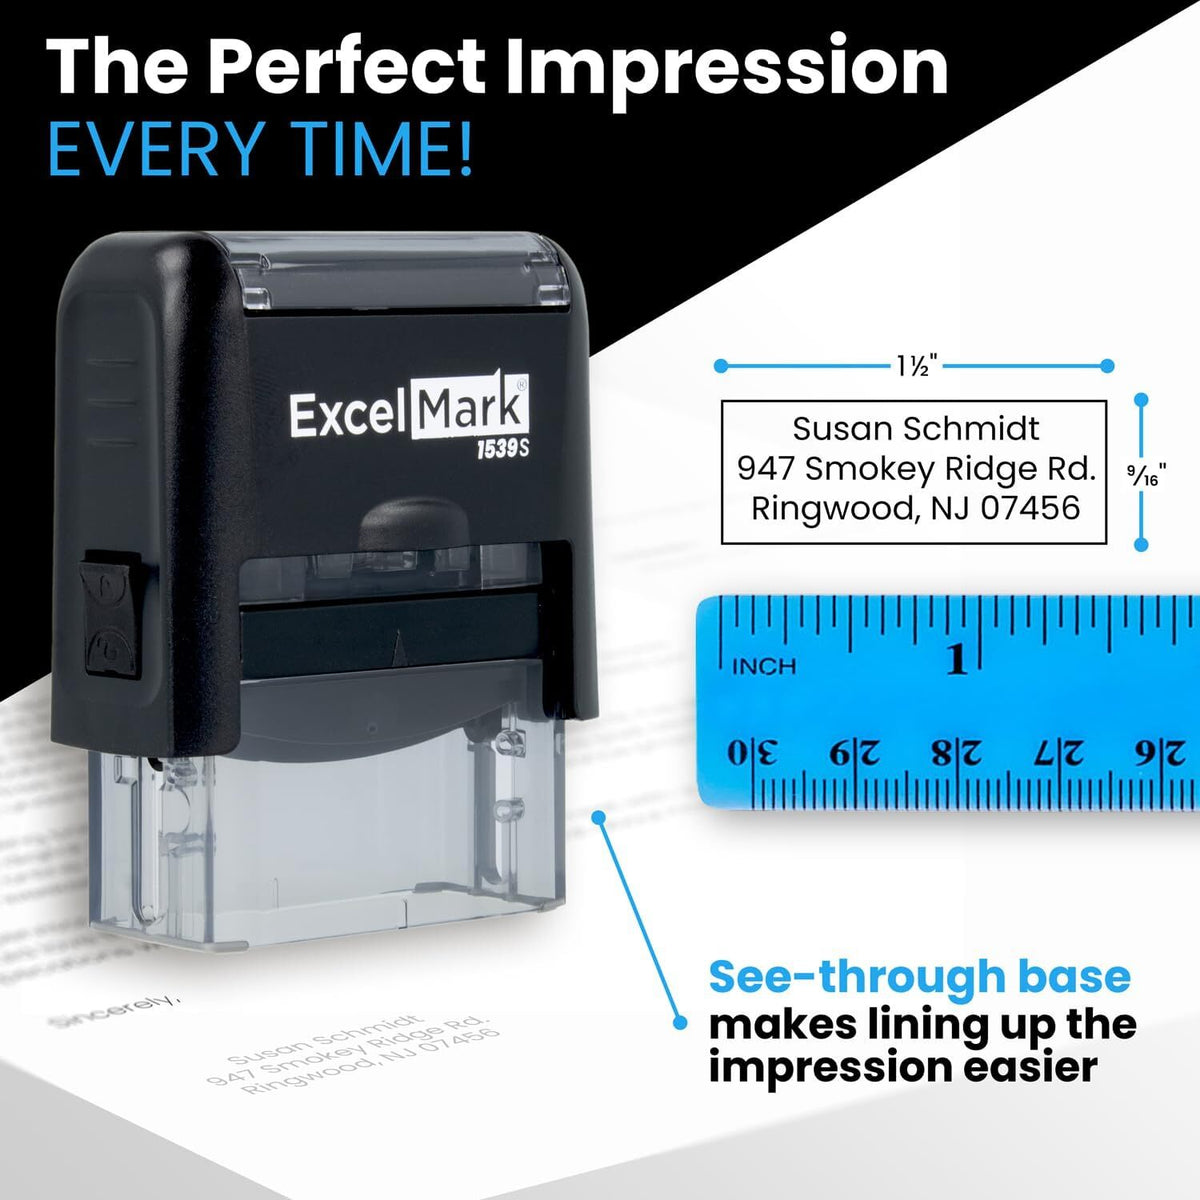 TOP Secret Self Inking Rubber Stamp - Red Ink (ExcelMark A1539)